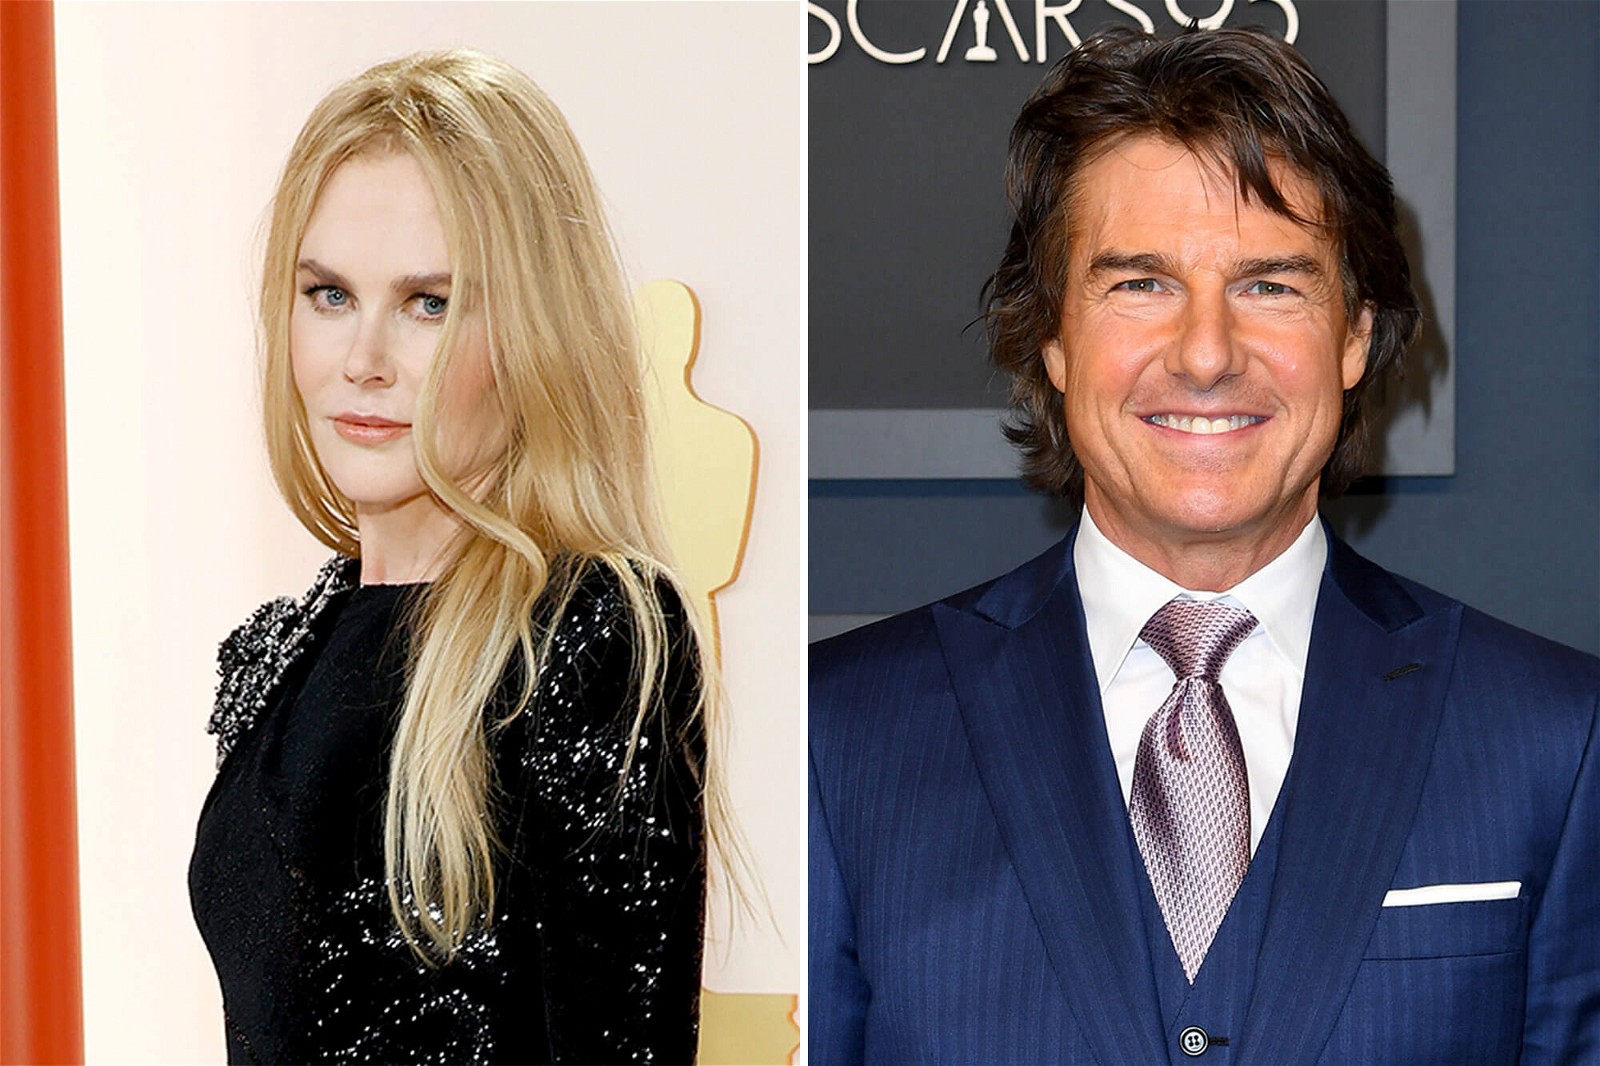 Nicole Kidman and Tom Cruise were married from 1990-2001